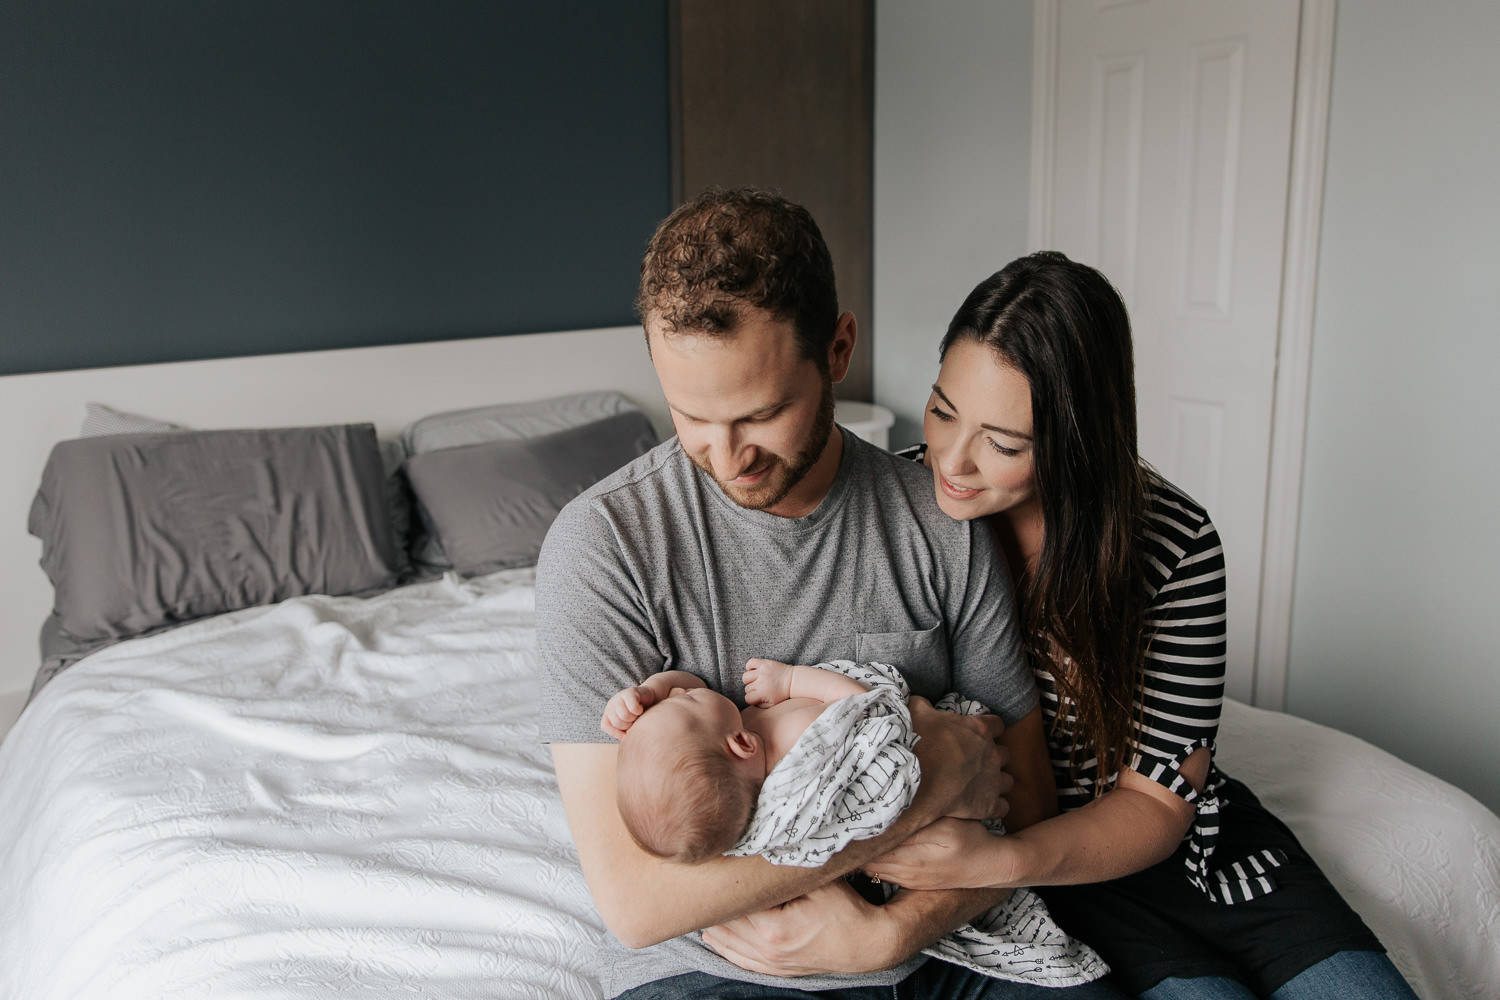 family of 3, new parents sitting on the edge of bed, dad holding 2 week old baby girl with light hair, mom snuggled next to husband, smiling at daughter - Newmarket In-Home Photos